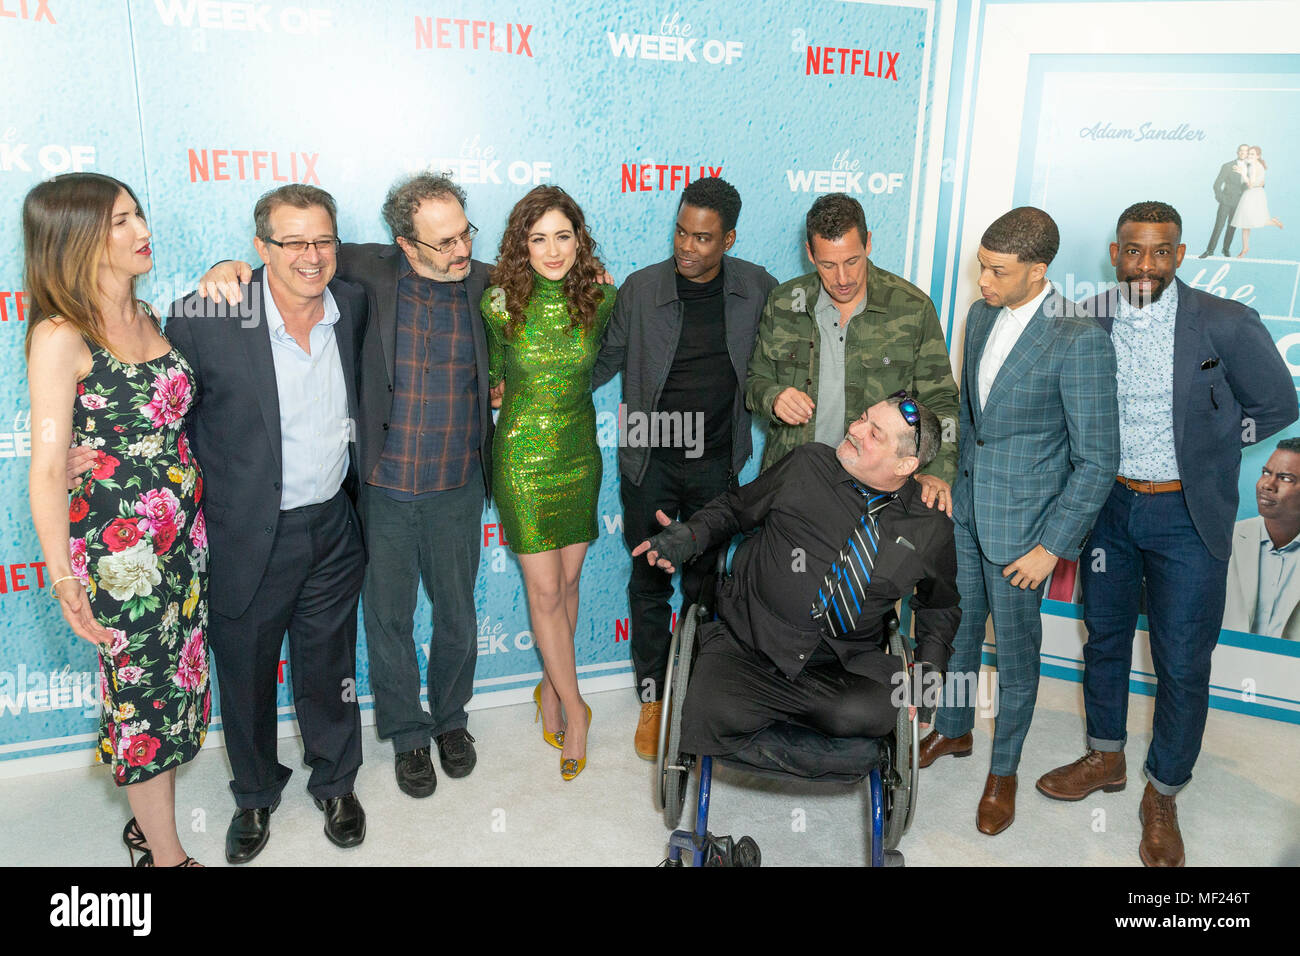 New York, NY - April 23, 2018: Jackie Sandler, Allen Covert, Robert Smigel, Allison Strong, Chris Rock, Adam Sandler, Roland Buck III, Chuck Nice, Jim Barone attend premiere of the The Week Of at AMC Loews Lincoln Square Credit: lev radin/Alamy Live News Stock Photo